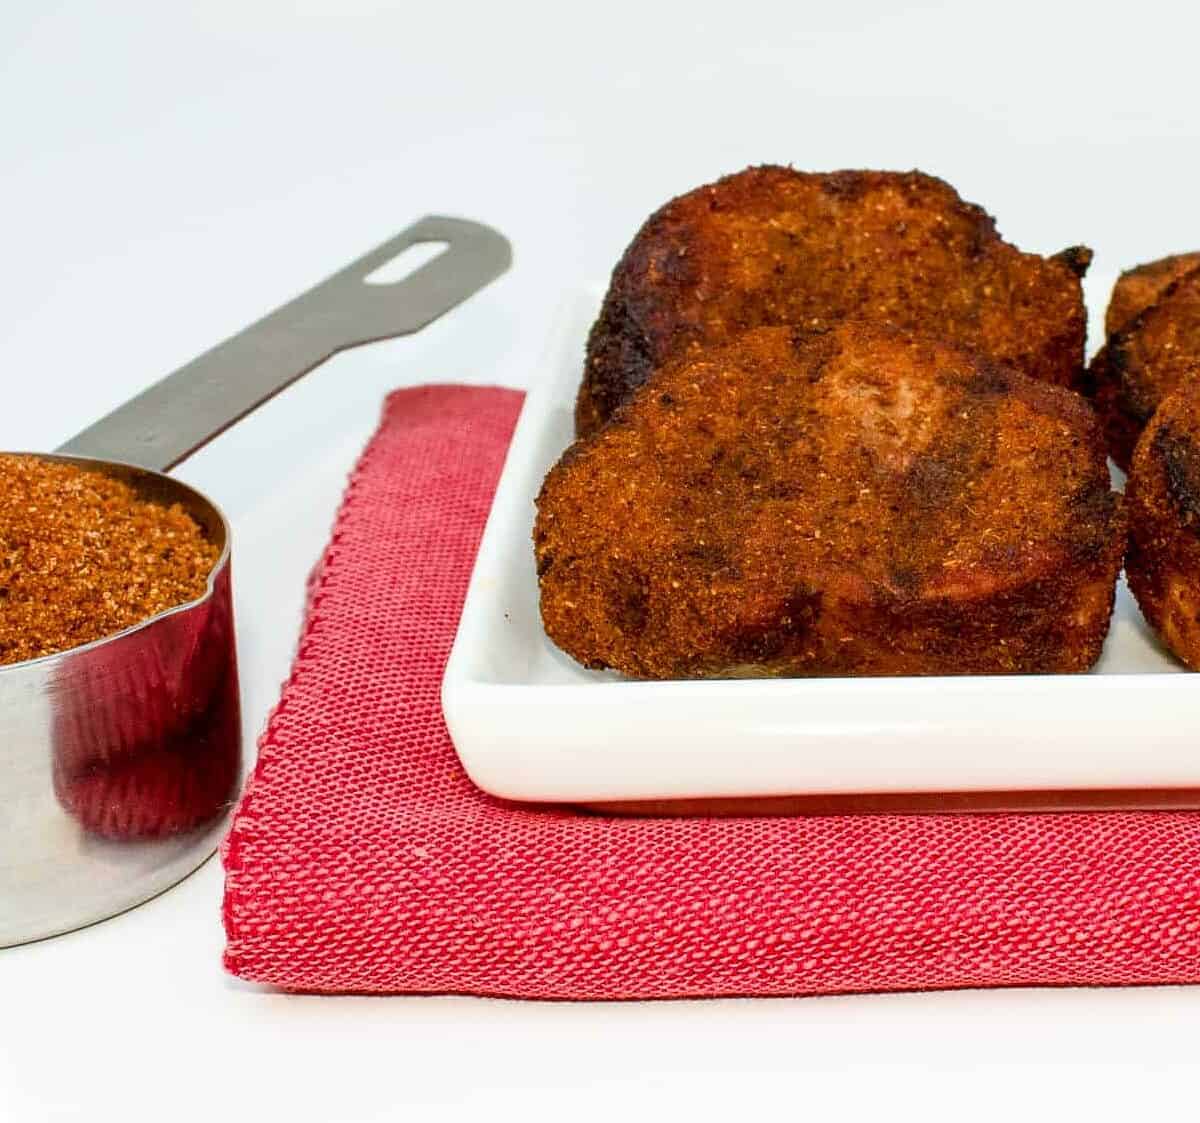  A smokin' hot time is guaranteed with this smoky chipotle steak rub! 🔥🔥